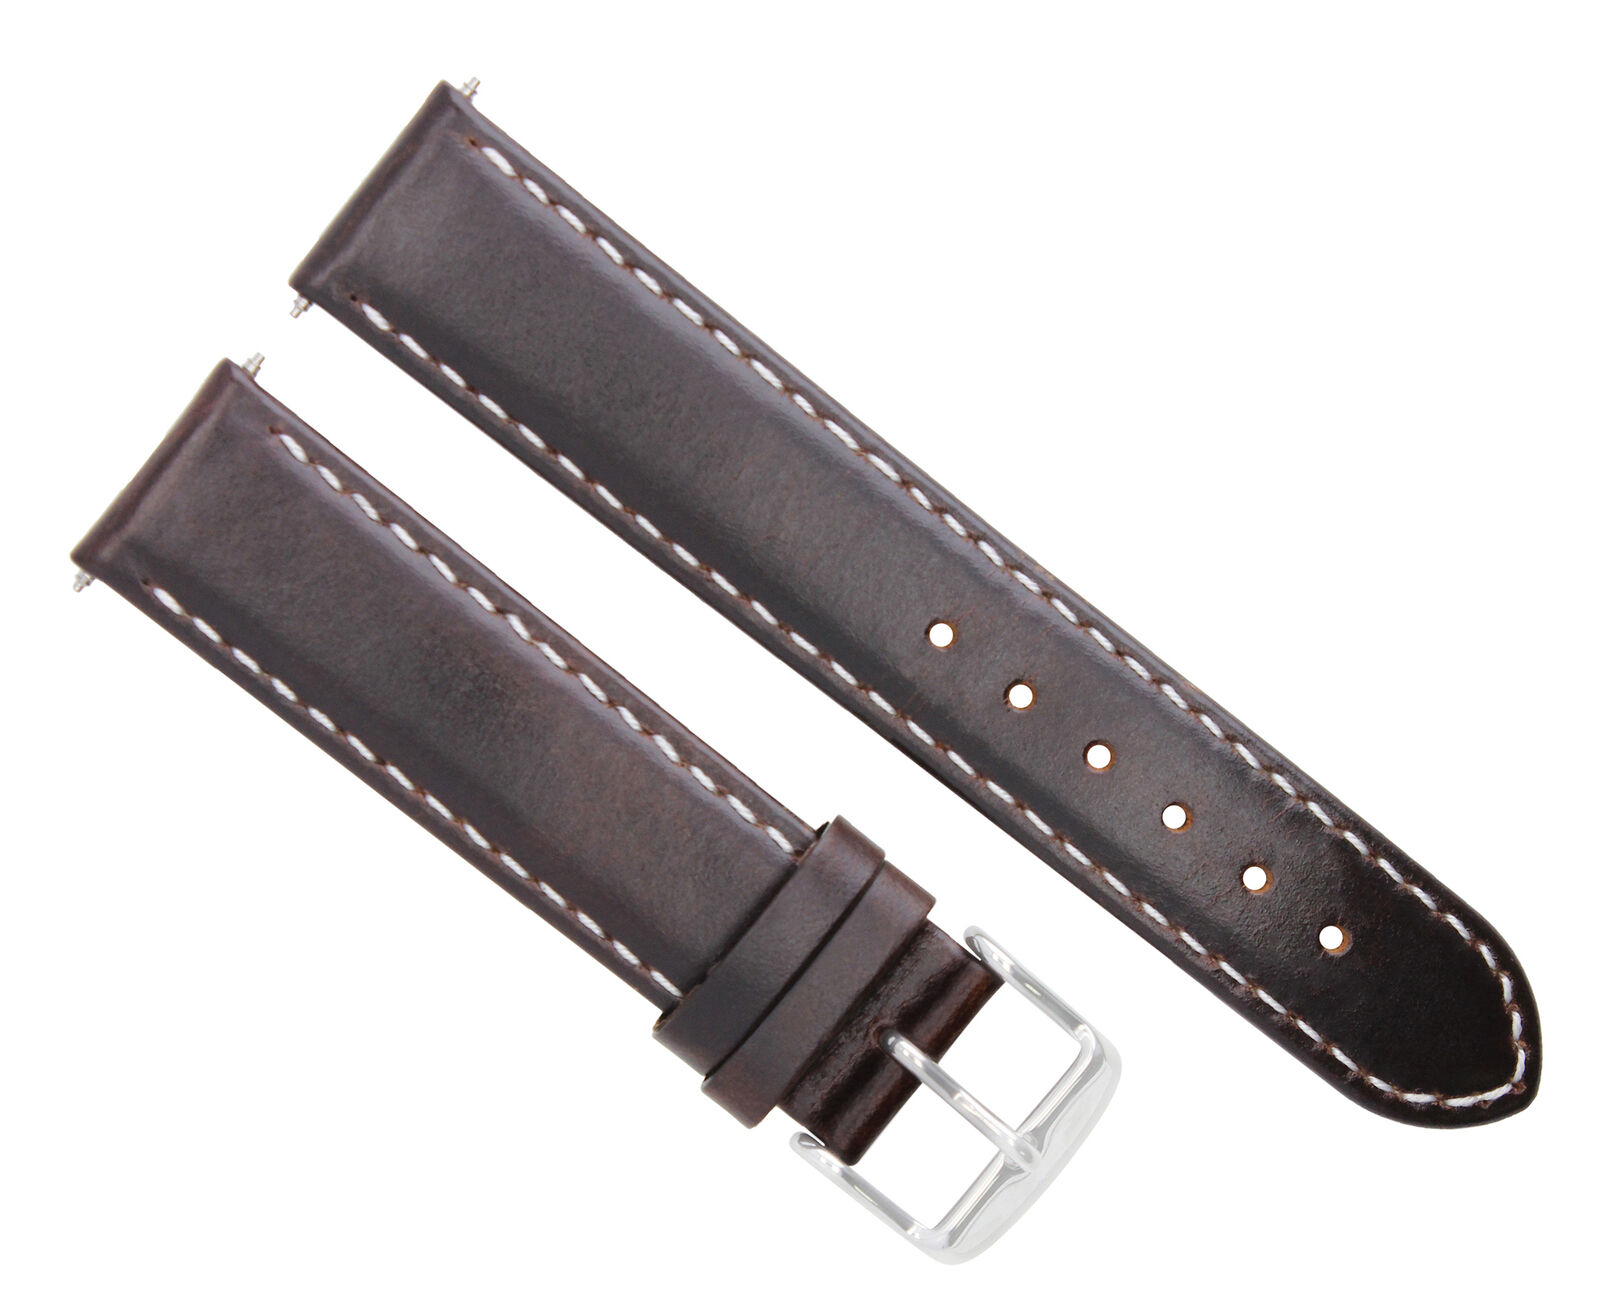 20MM SMOOTH LEATHER STRAP BAND FOR BREGUET WATERPROOF DARK BROWN WHITE STITCHING